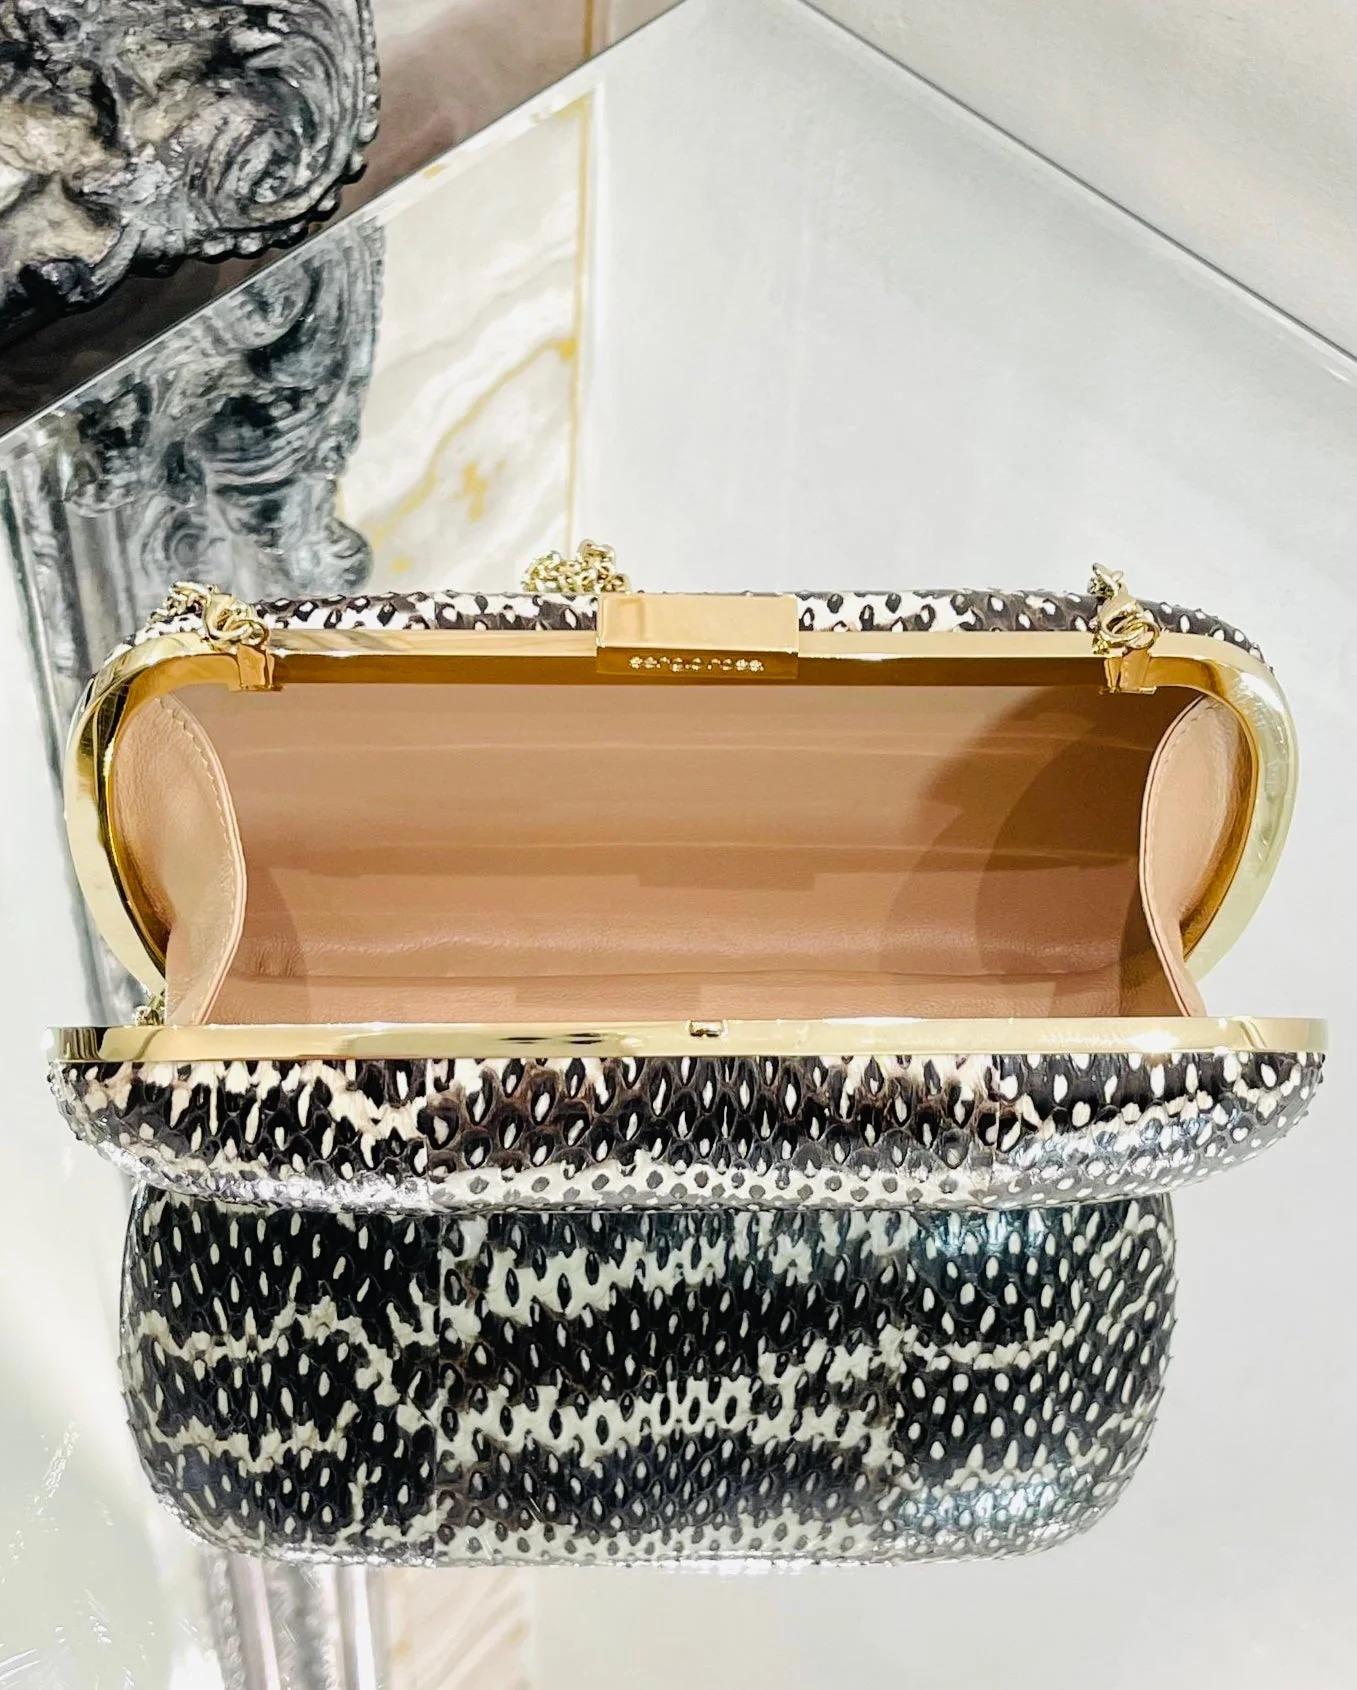 Women's Sergio Rossi Lizard Skin Clutch Bag With Chain For Sale